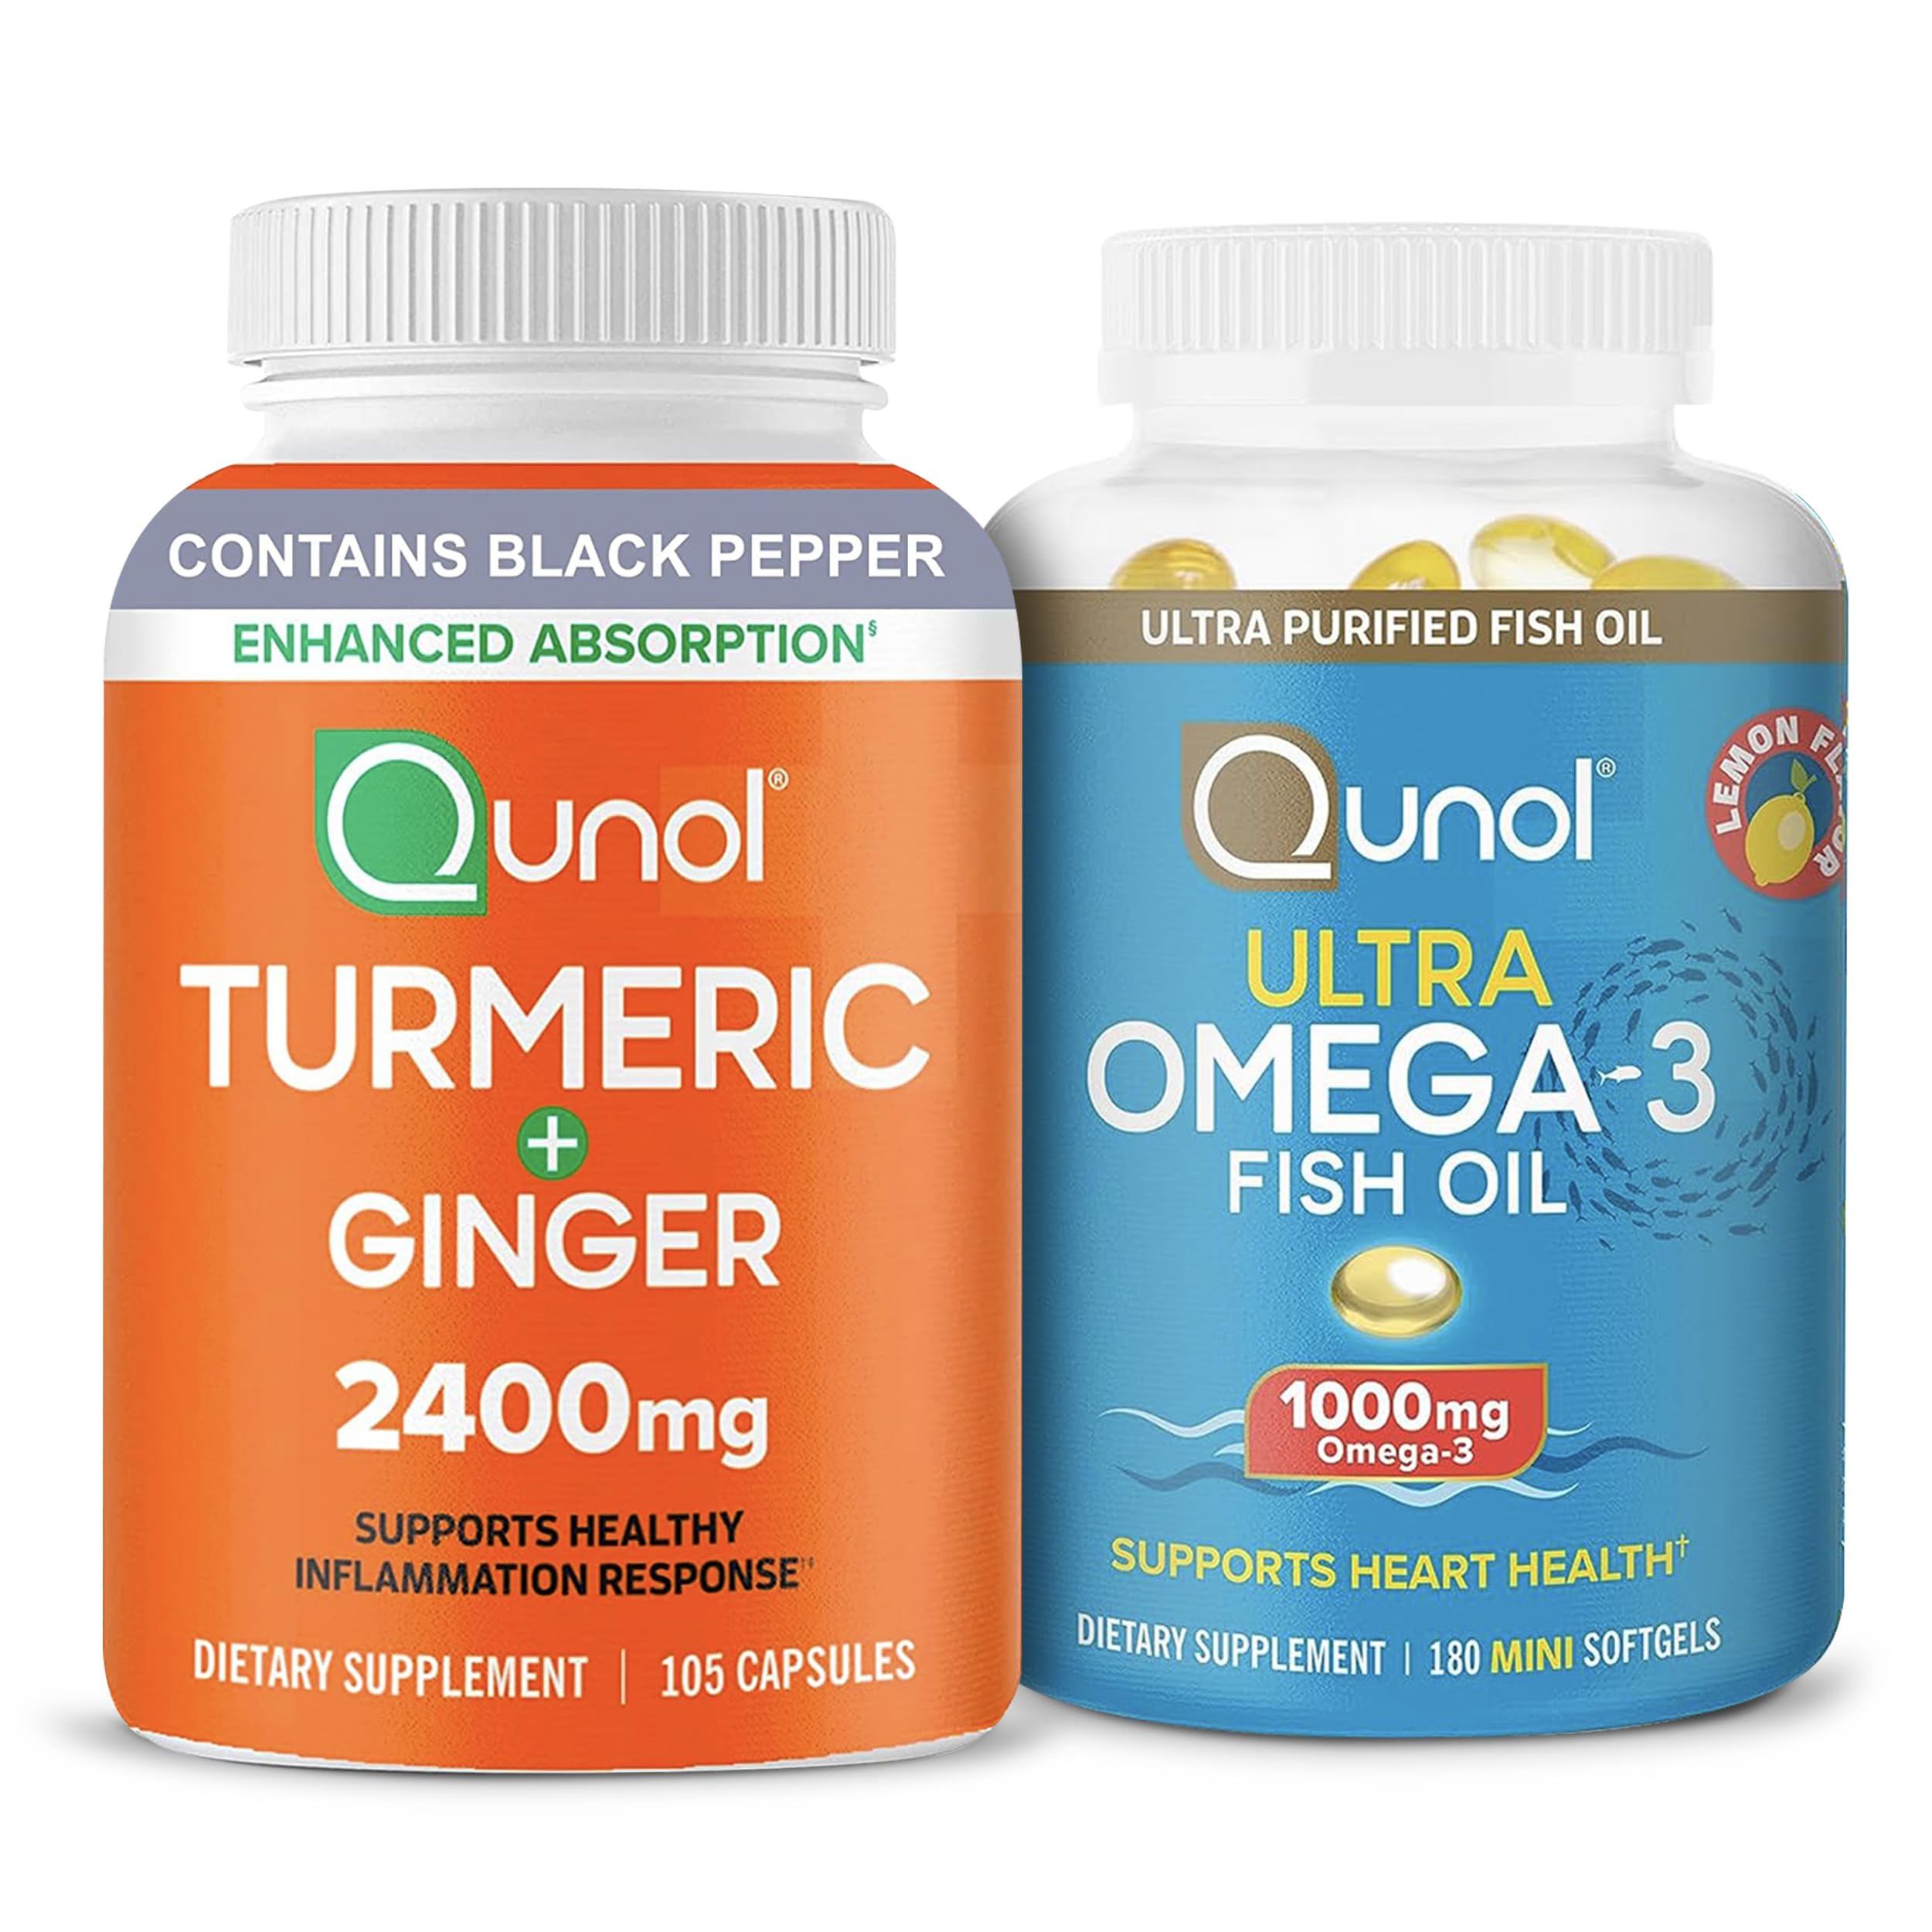 Qunol Turmeric Curcumin with Black Pepper & Ginger, 2400mg Turmeric Extract with 95% Curcuminoids, 105 Count + Fish Oil Omega 3 Mini Softgels, 1000mg Omega 3 EPA + DHA, 3 Month Supply, 180 Count